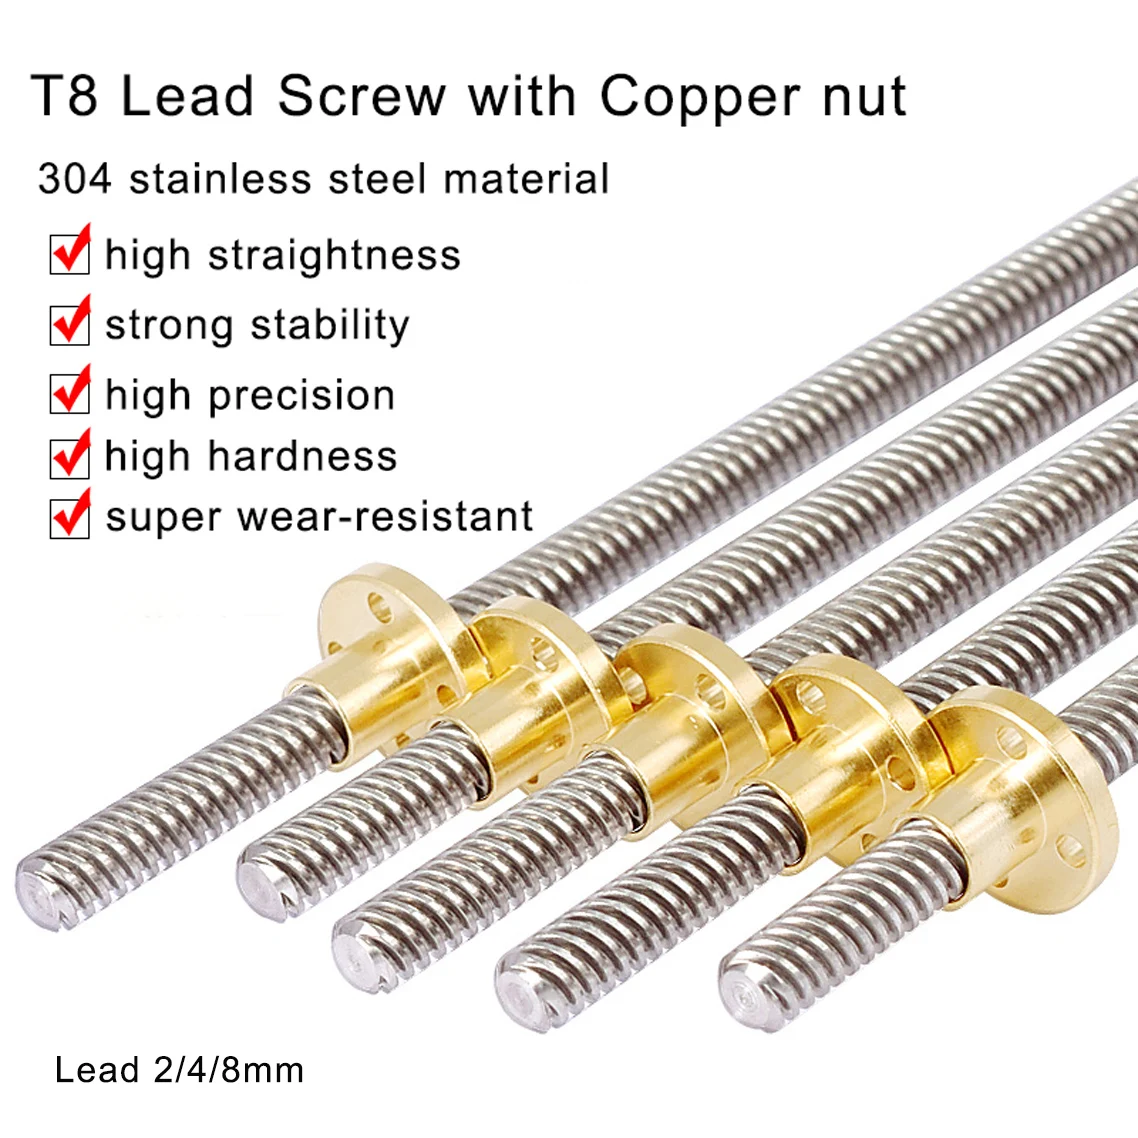 Acme Thread 200mm 8mm T8 Lead Screw and Copper Nut for 3D Printer Z Axis 